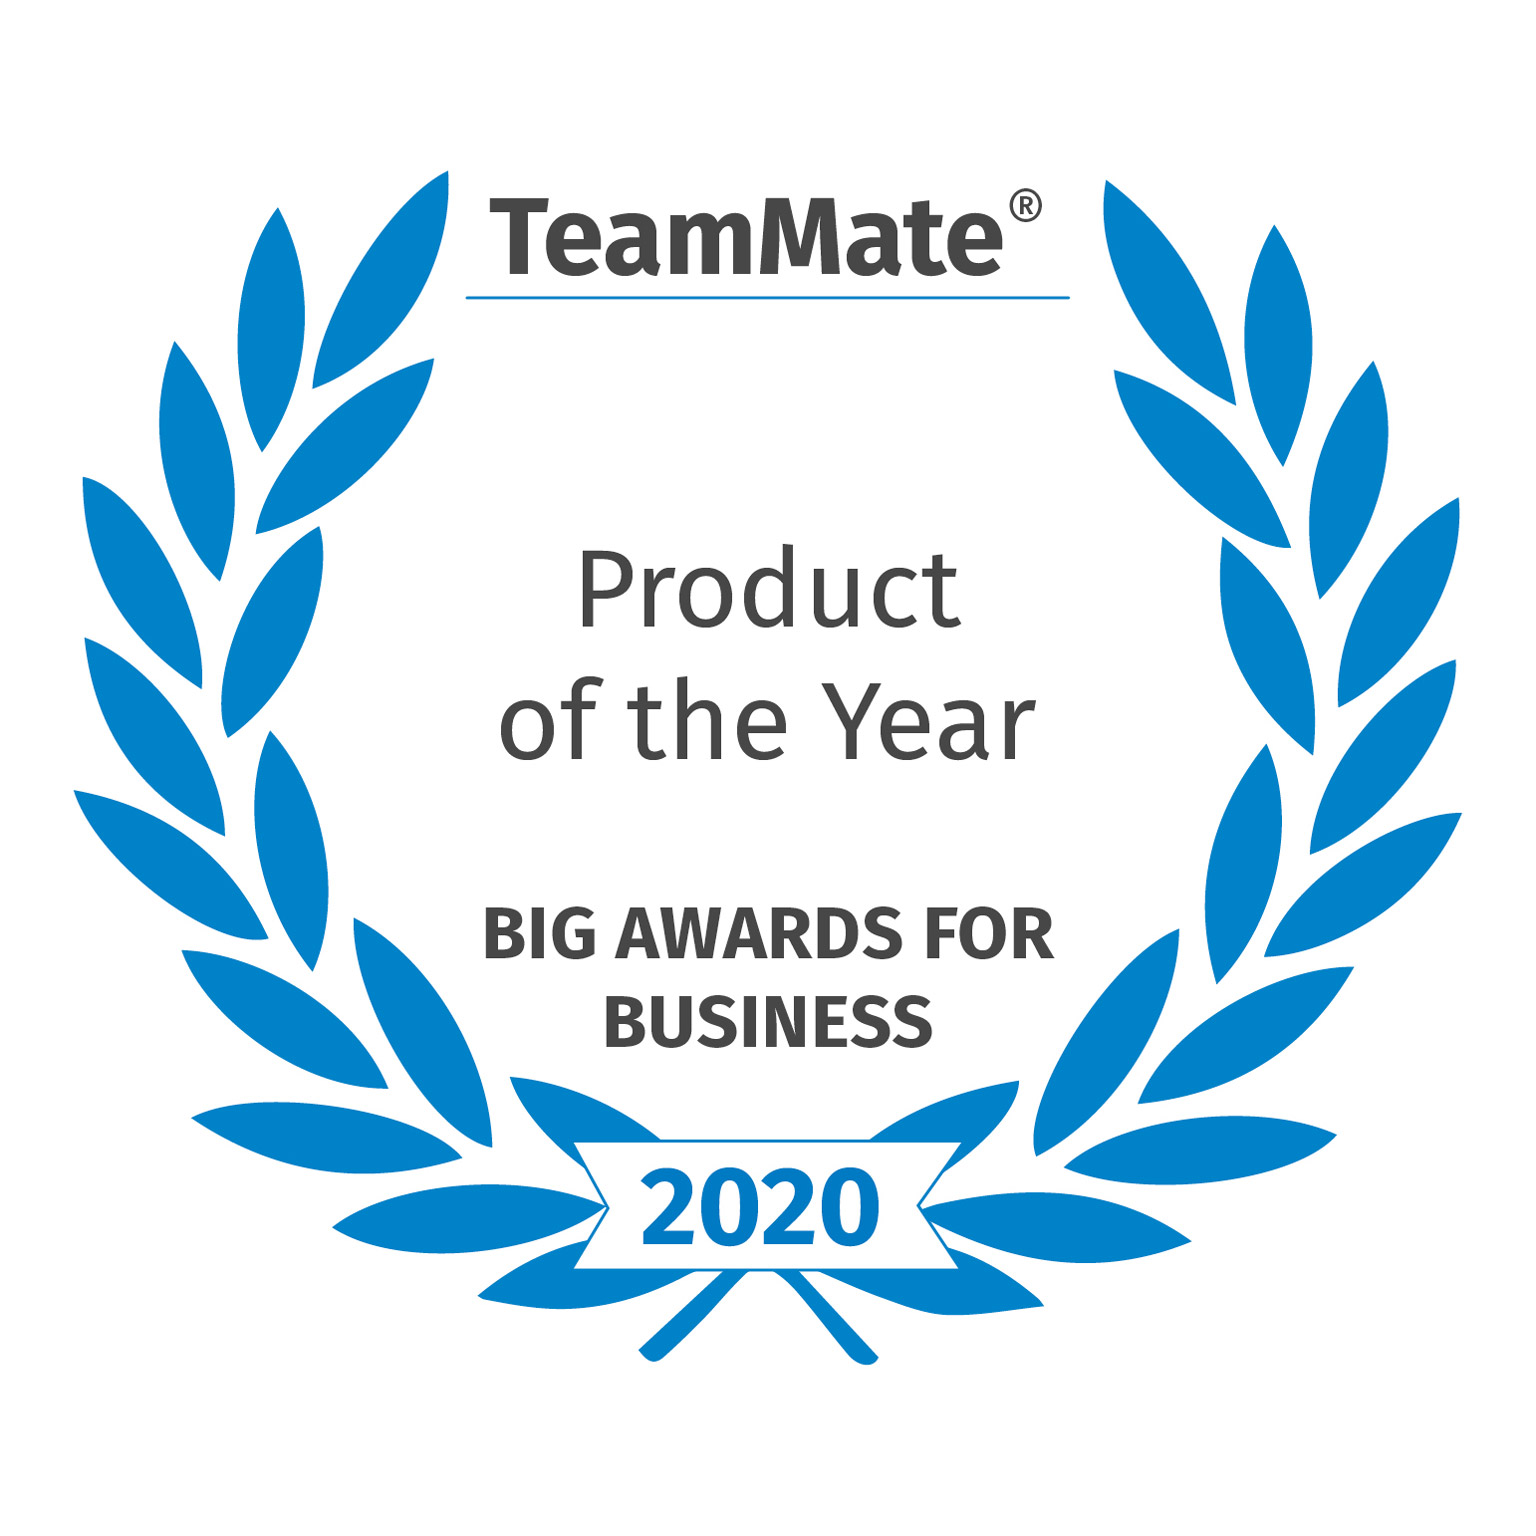 TeamMate Big Awards for Business 2020 Product of the Year